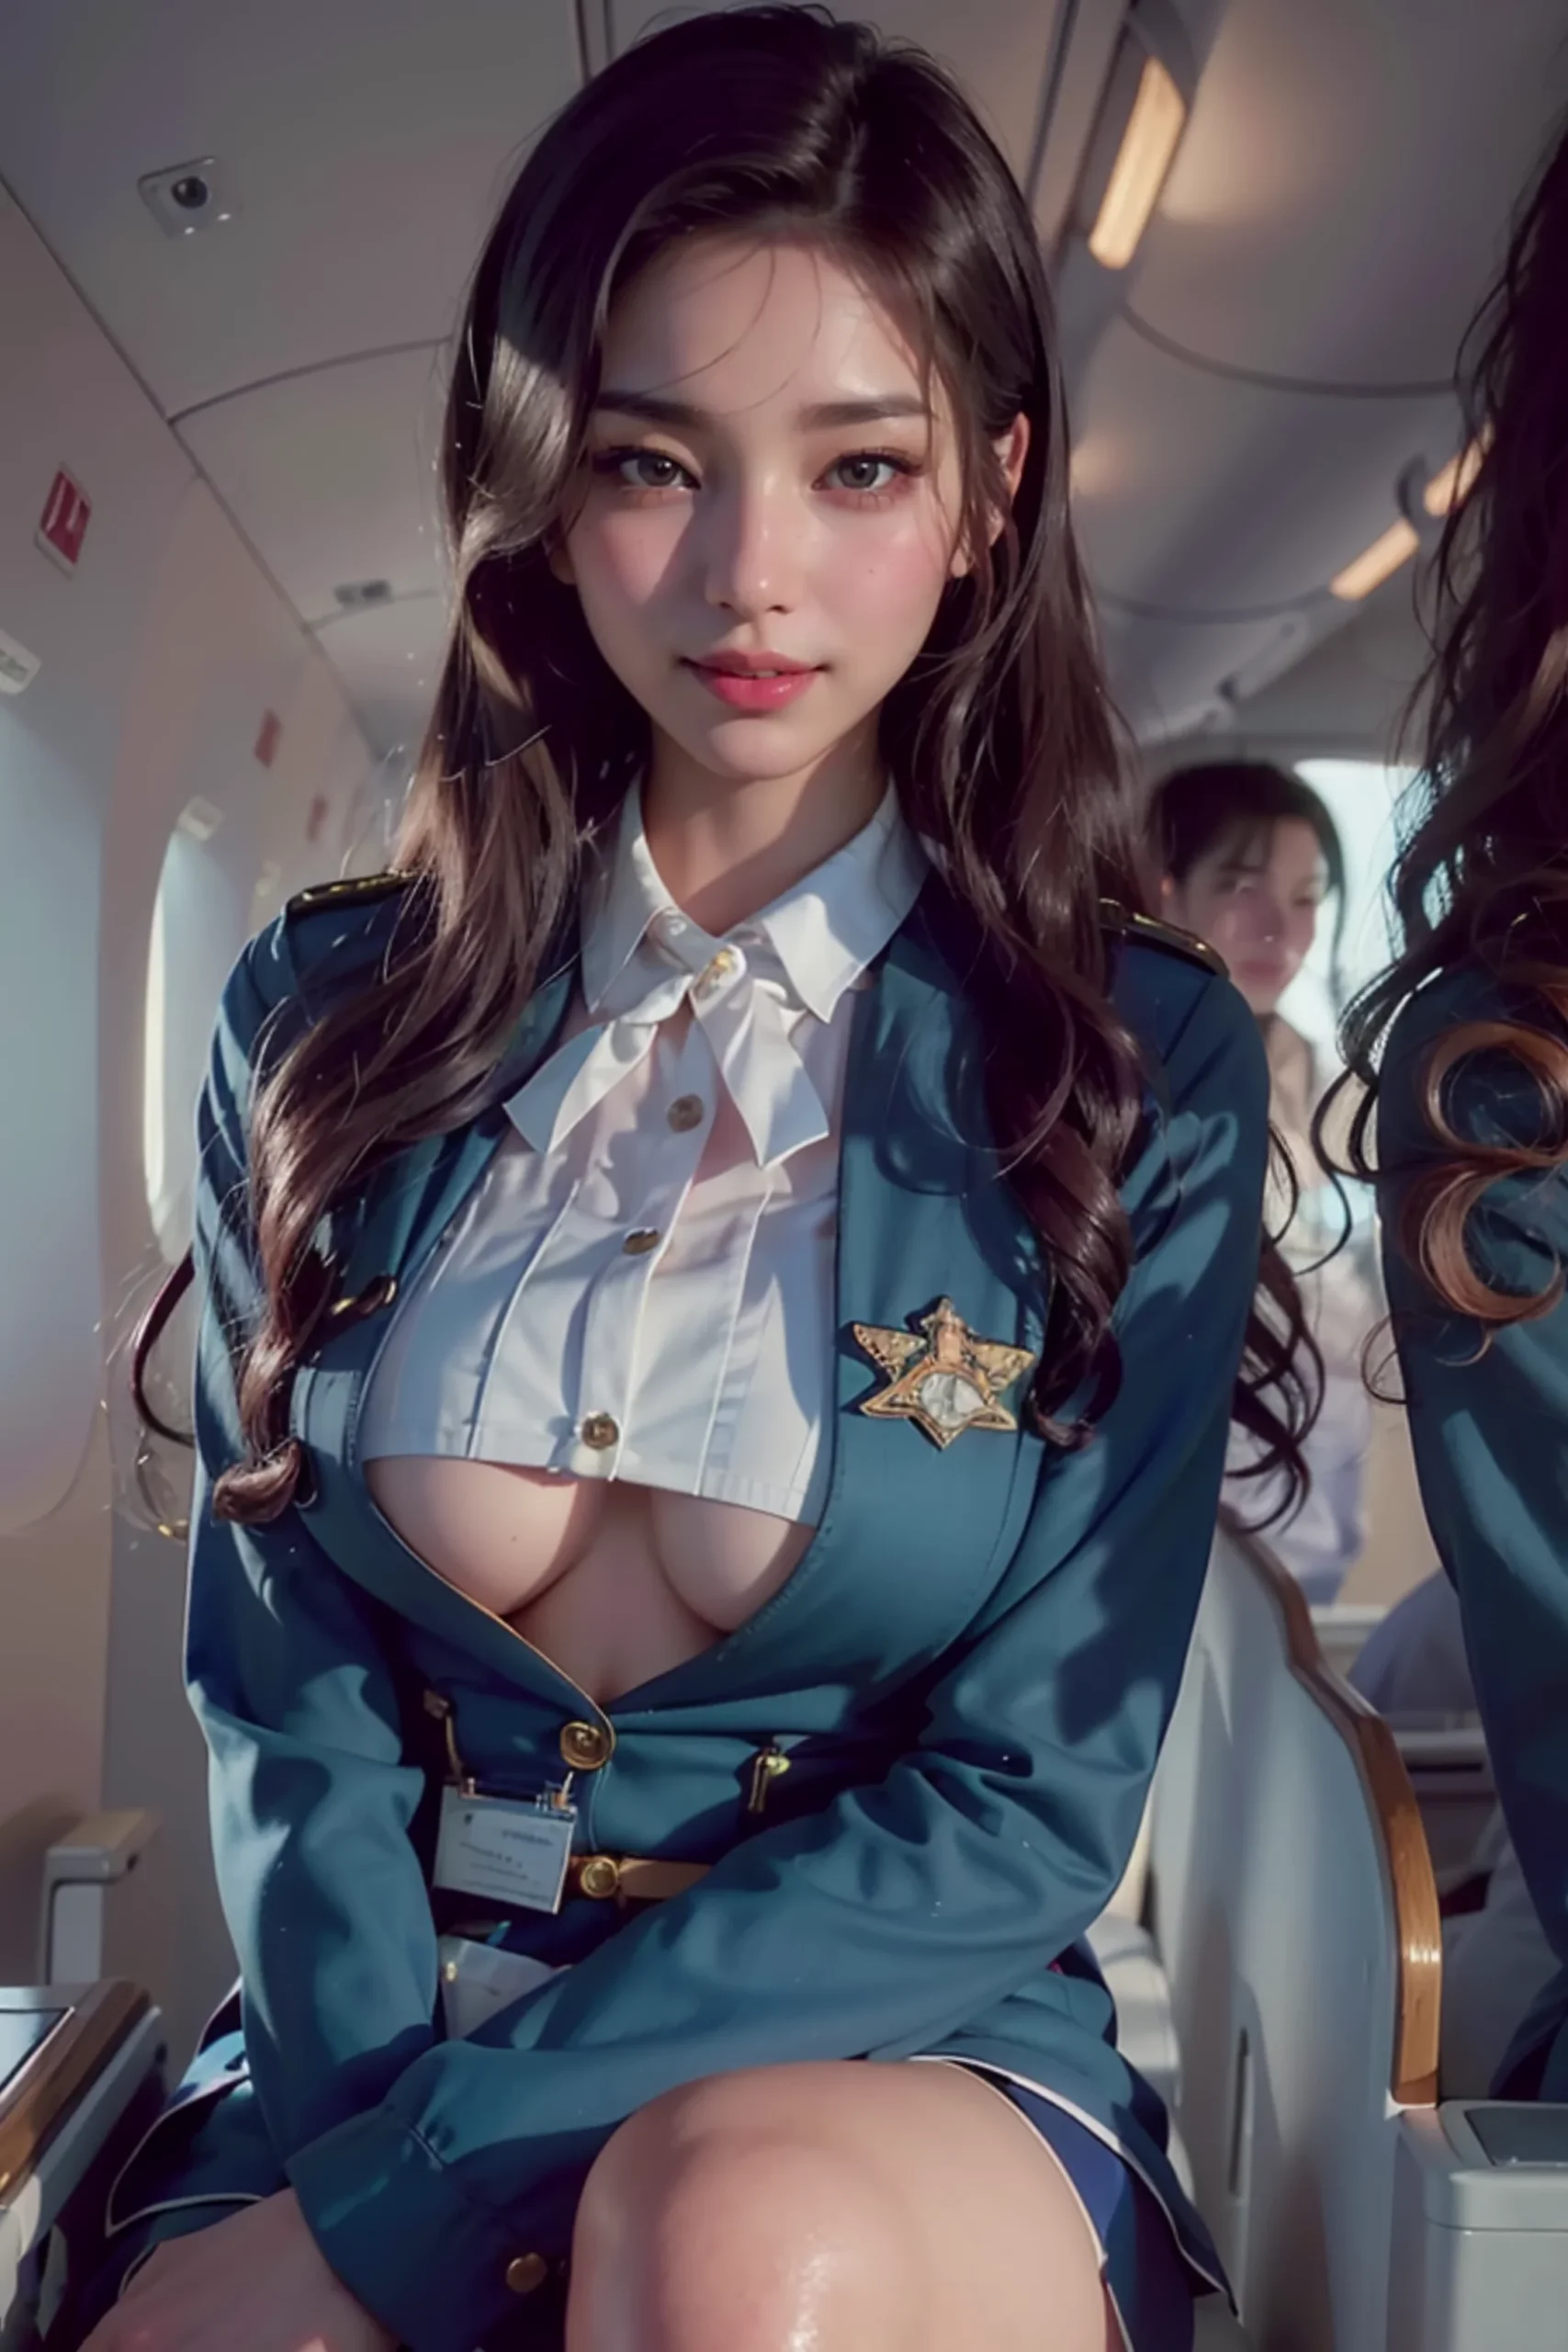 Sexy Flight Attendant Cosplay Vol. 2 Images 41